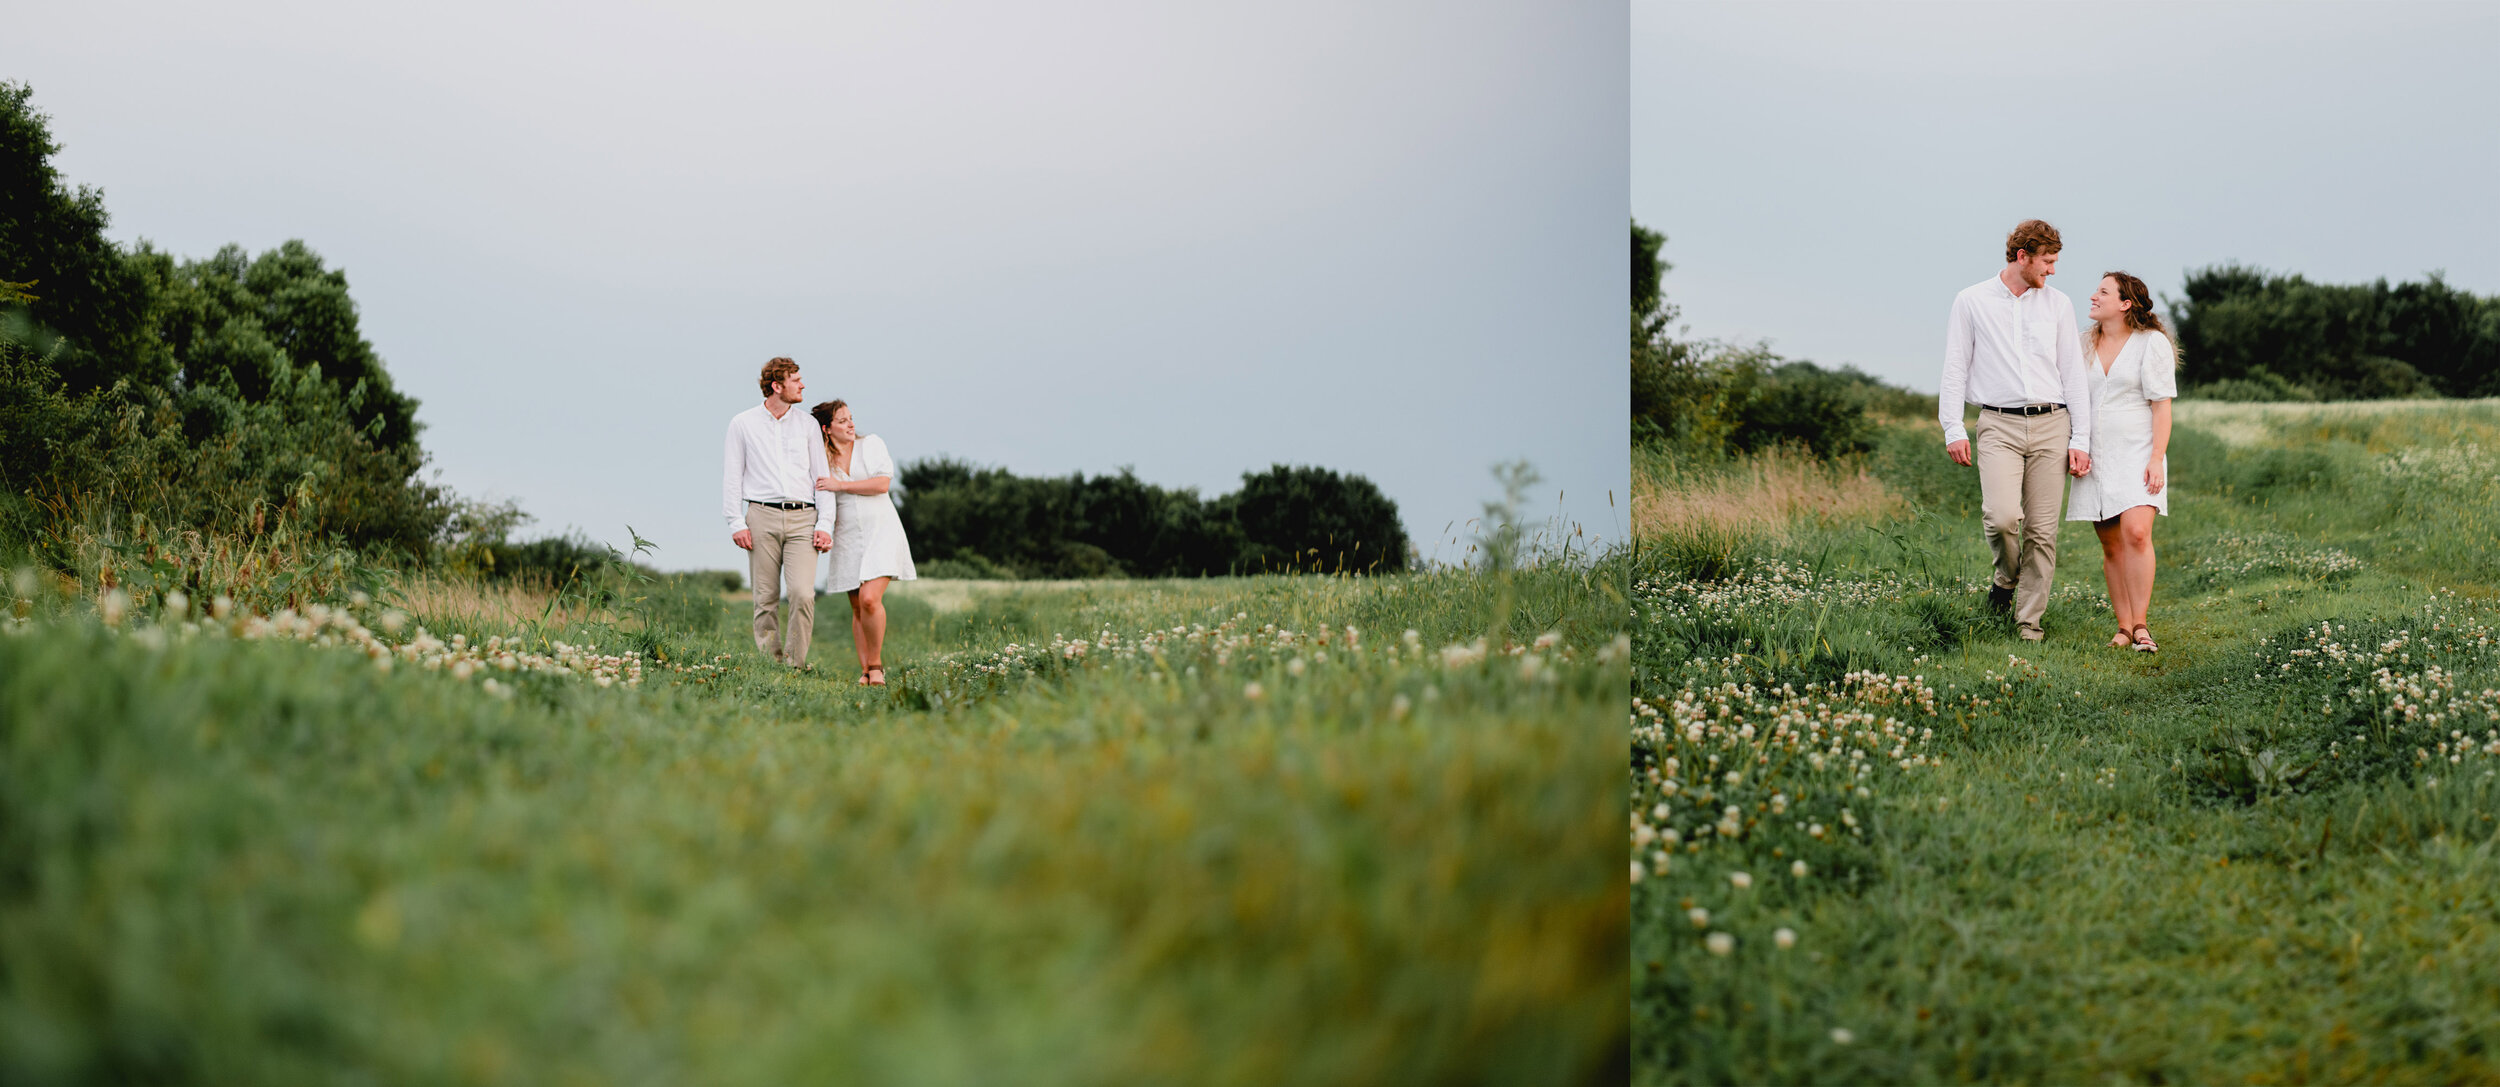 Kansas City Couples Photographer Wildflower Session with EffJay Photography002.jpg